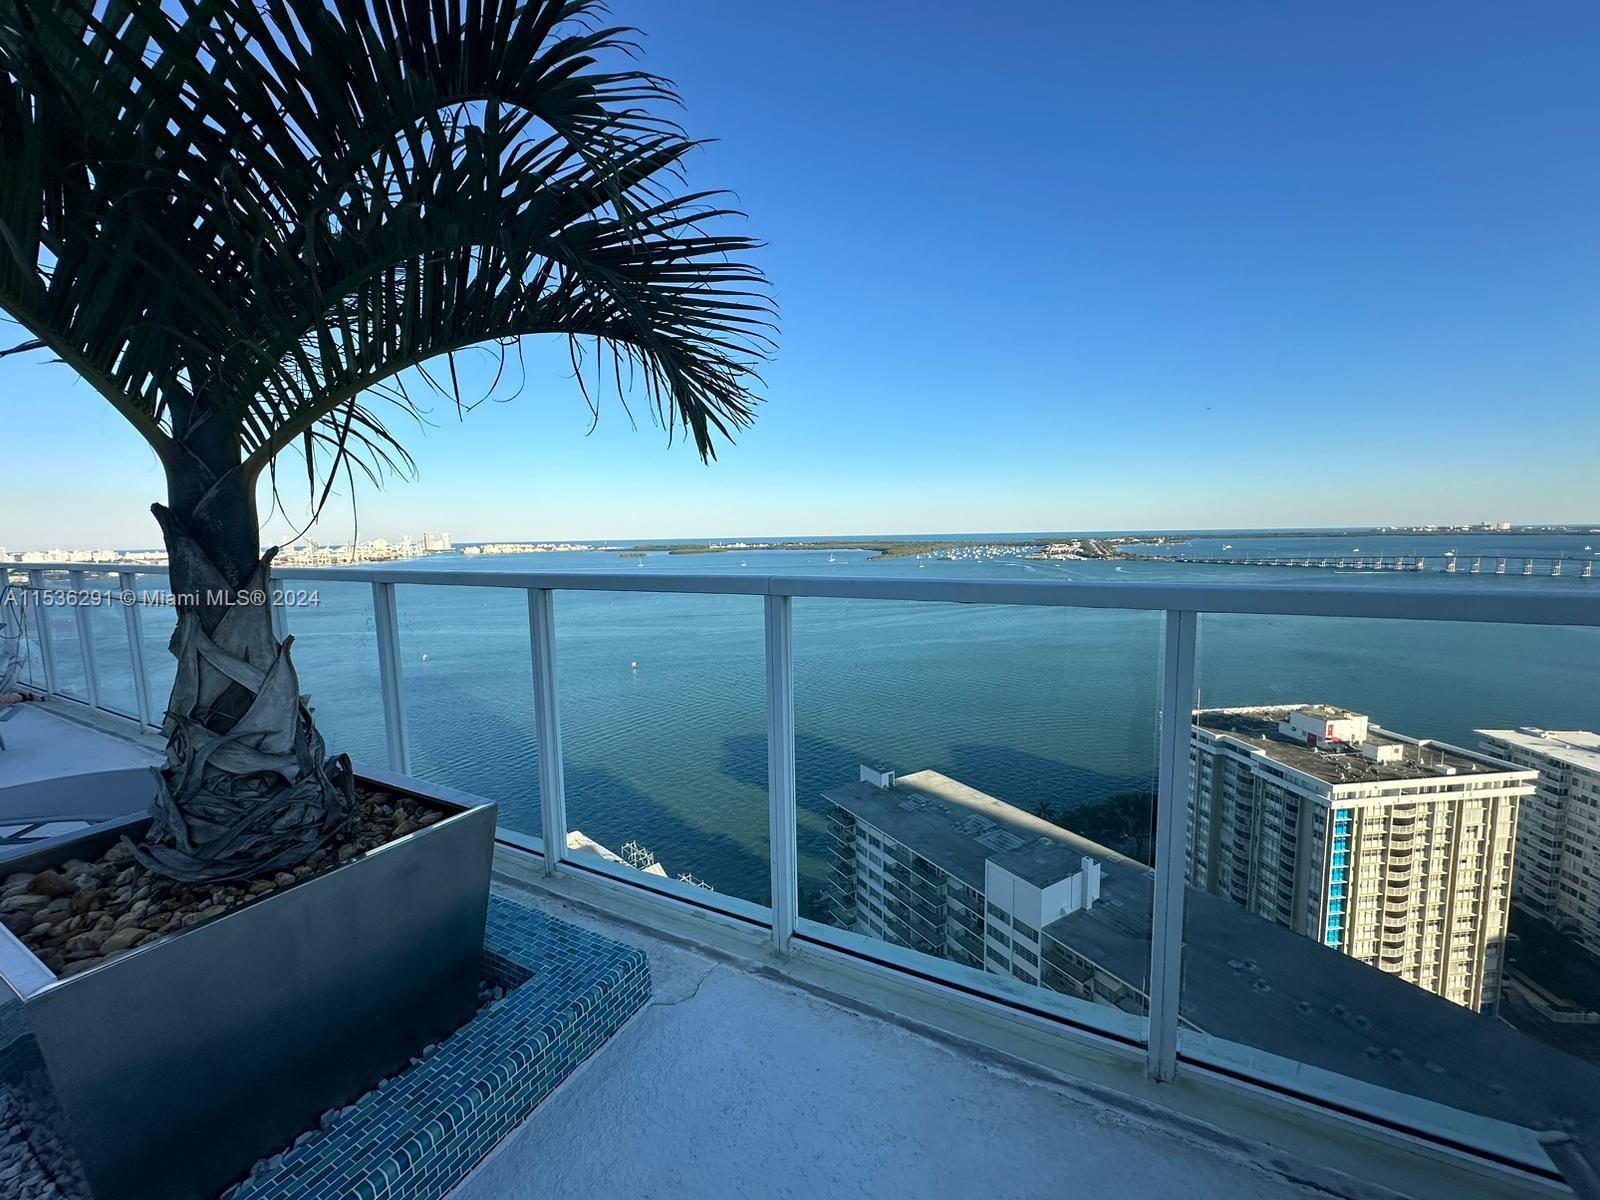 Beautiful apartment in the vibrant Brickell district. High ceilings and elegant marble floors. Recently renovated bathrooms, walk-in closets with built-ins, and modern beautiful kitchen. Enjoy luxury amenities including a rooftop pool deck boasting breathtaking views, a state-of-the-art gym, and a convenient business center. 24/7 concierge service, valet parking, high-speed internet, and cable TV. Perfectly situated just 15 minutes from South Beach, the Design District, Coral Gables, Key Biscayne, and Coconut Grove, with easy access to the best restaurants and retail stores. Experience the epitome of urban living in a prime location. Live, work and play. With a big spacious storage !